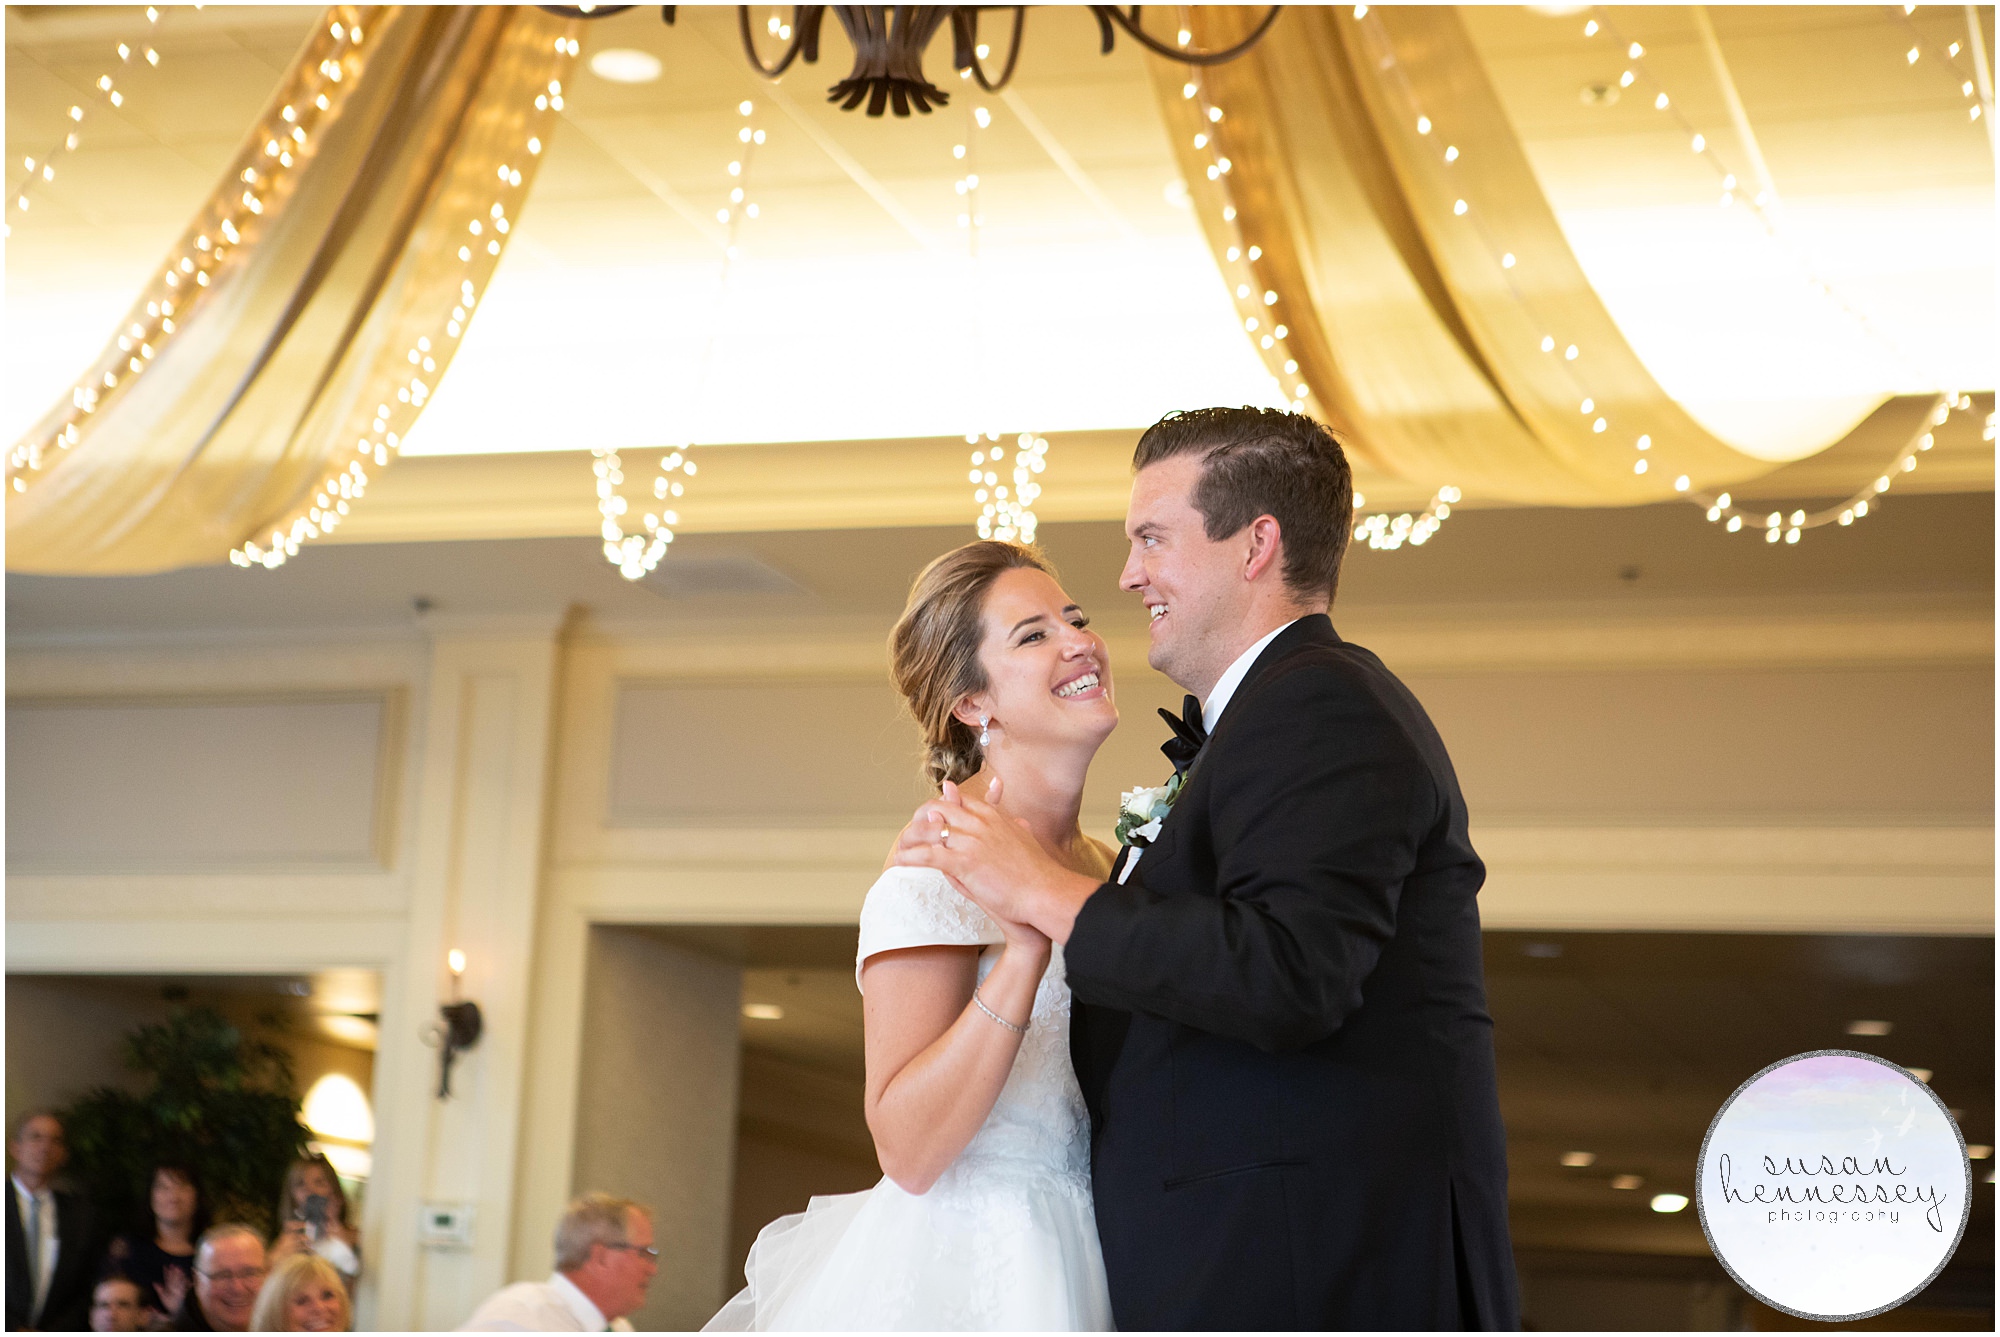 First dance for couple at Rehoboth Beach wedding